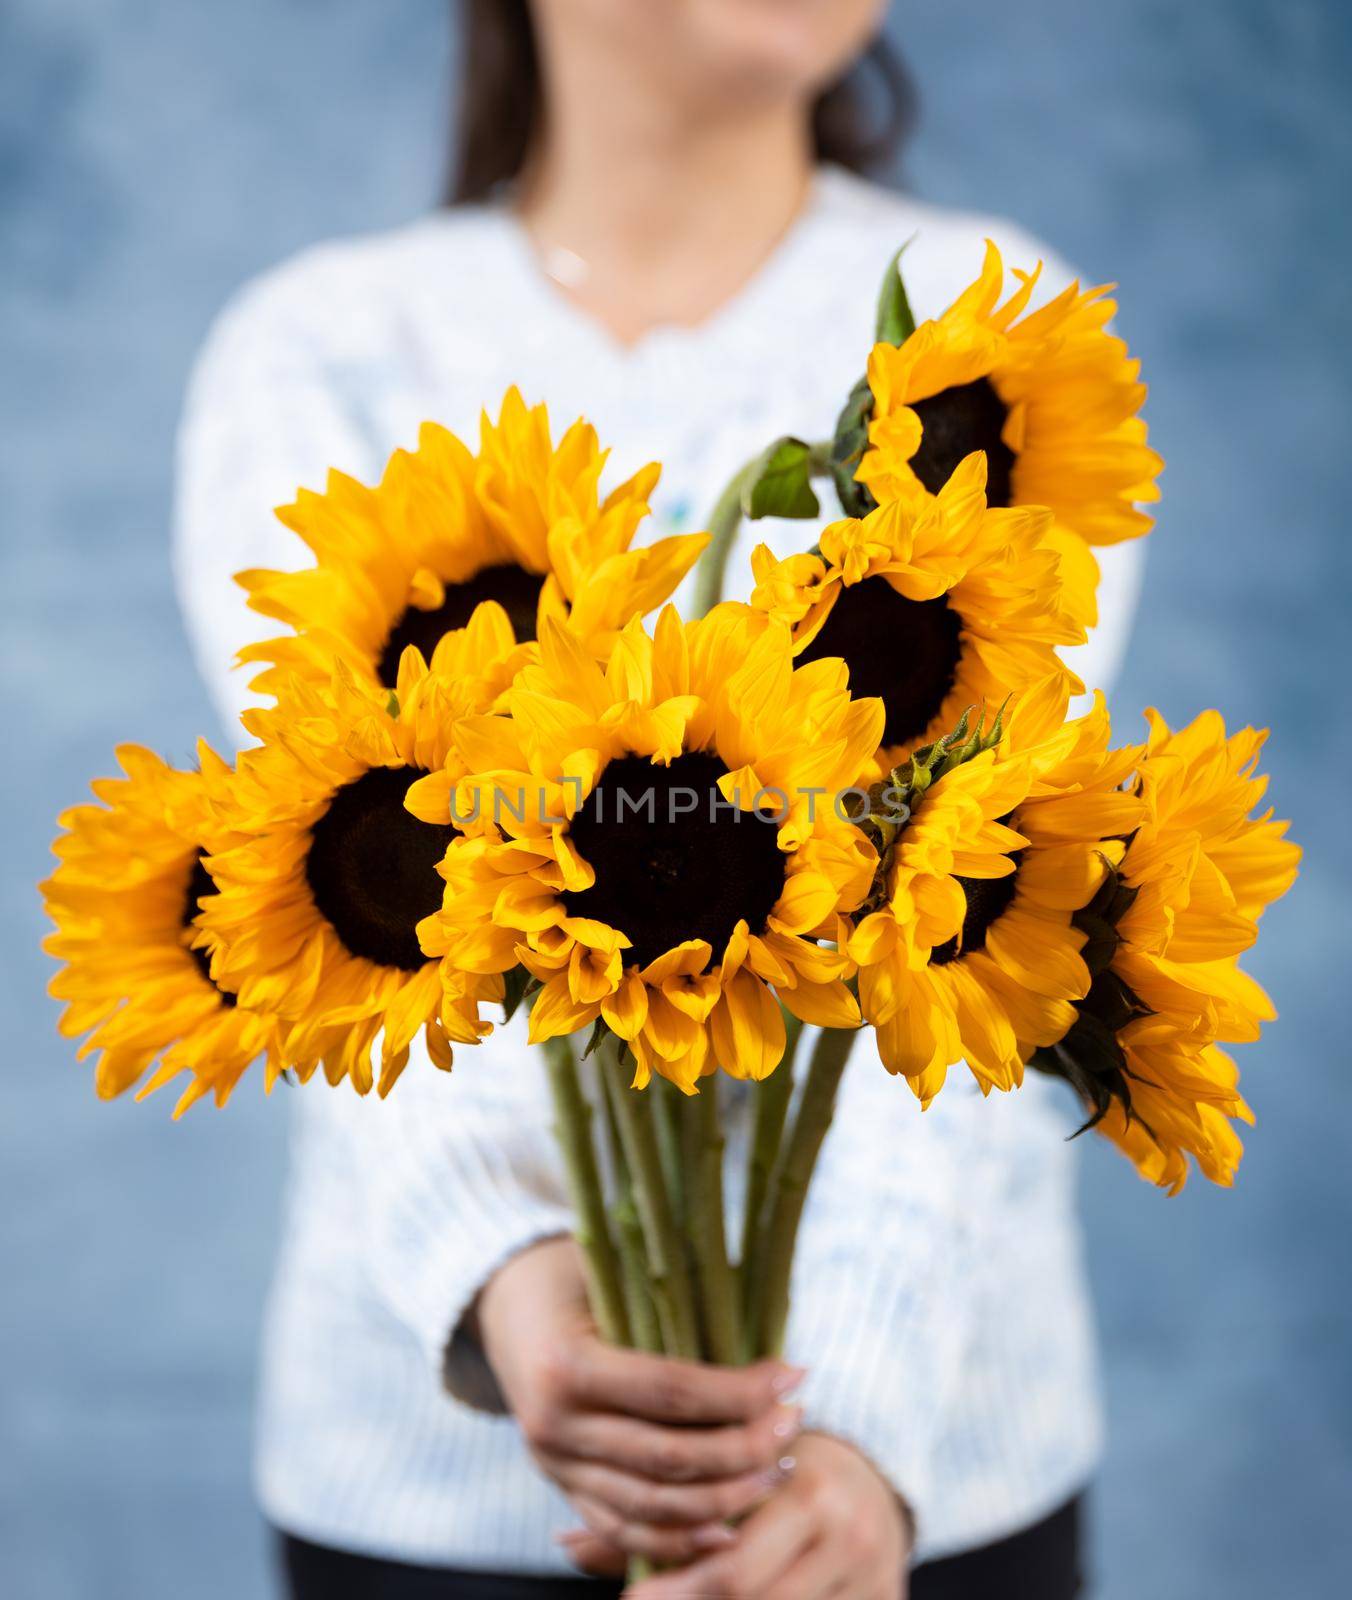 Woman holding sunflowers with blue background by ferhad